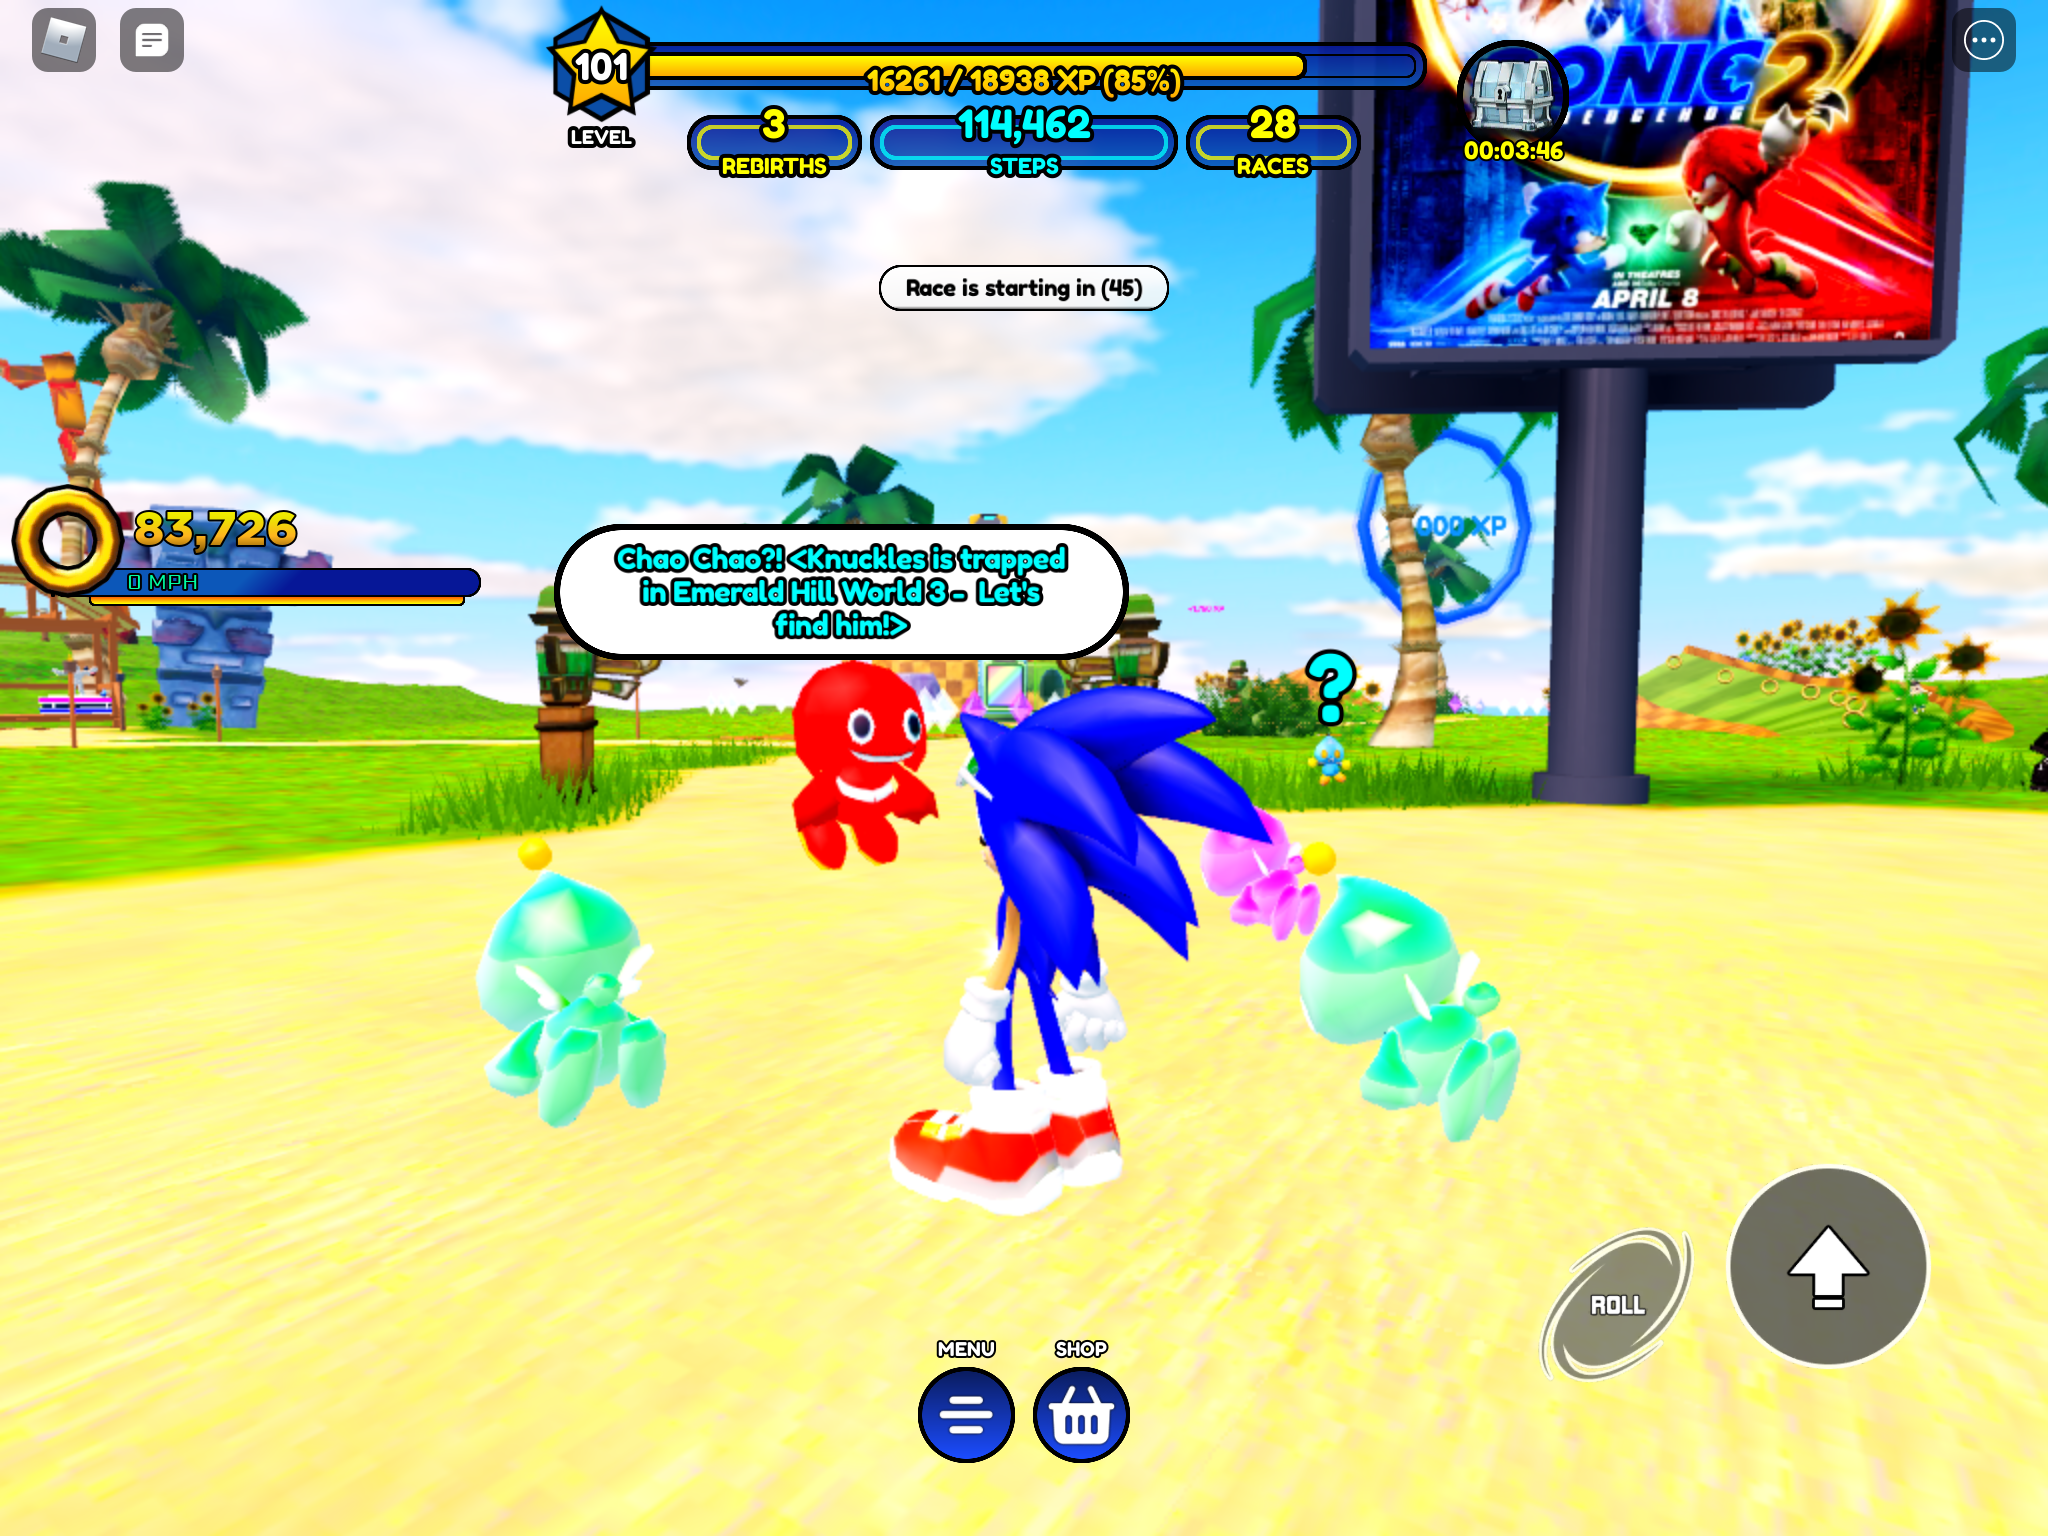 Moon Chao in Sonic Adventure 2 